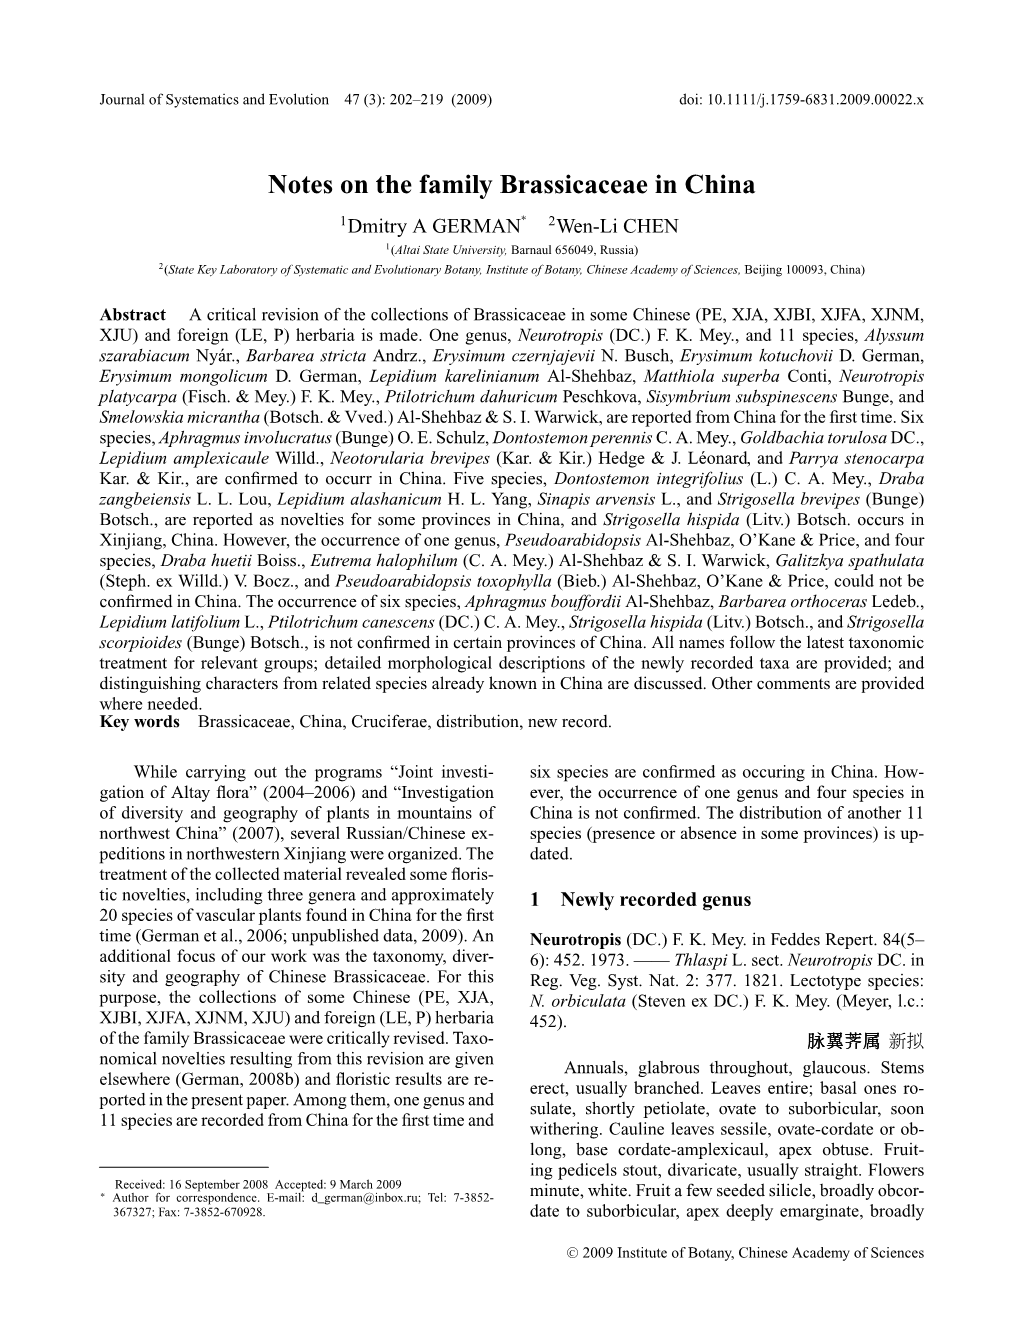 Notes on the Family Brassicaceae in China